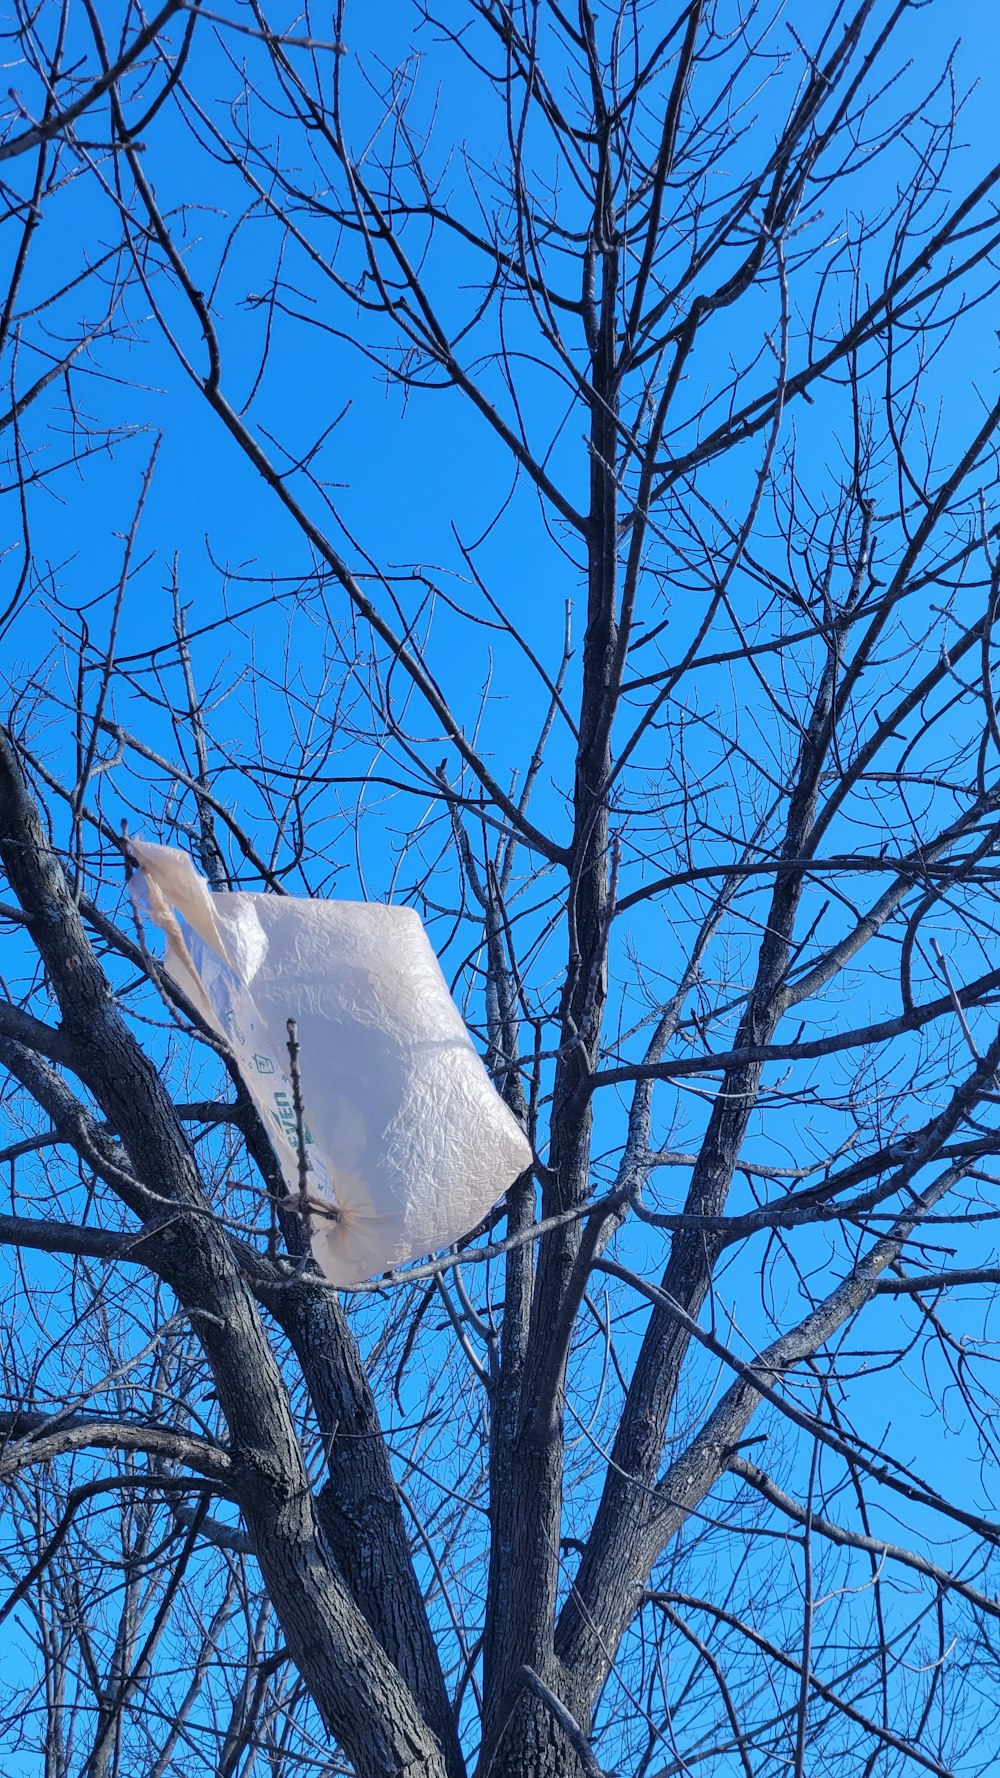 a plastic bag stuck in a bare tree